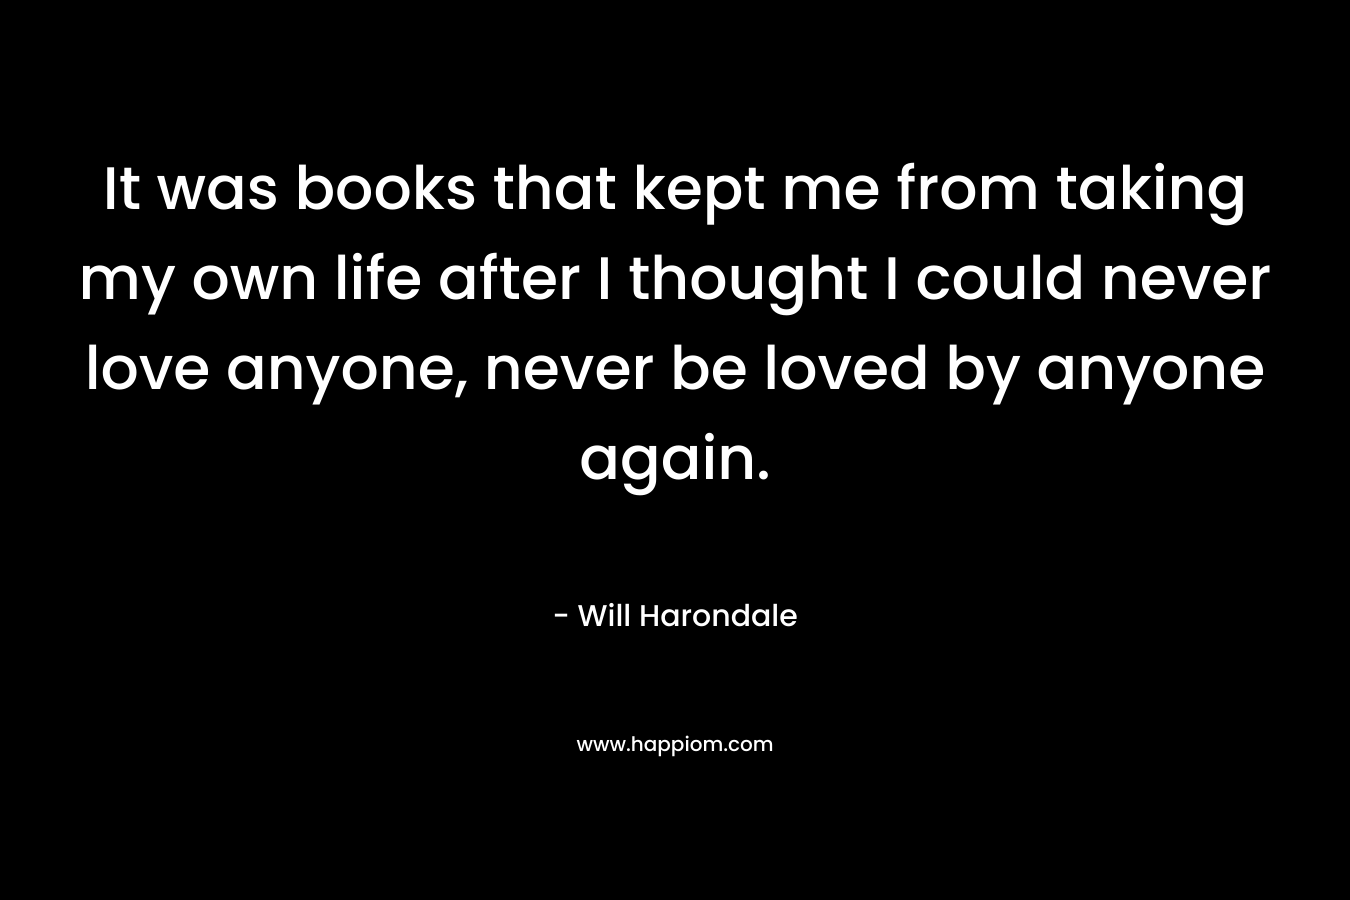 It was books that kept me from taking my own life after I thought I could never love anyone, never be loved by anyone again.